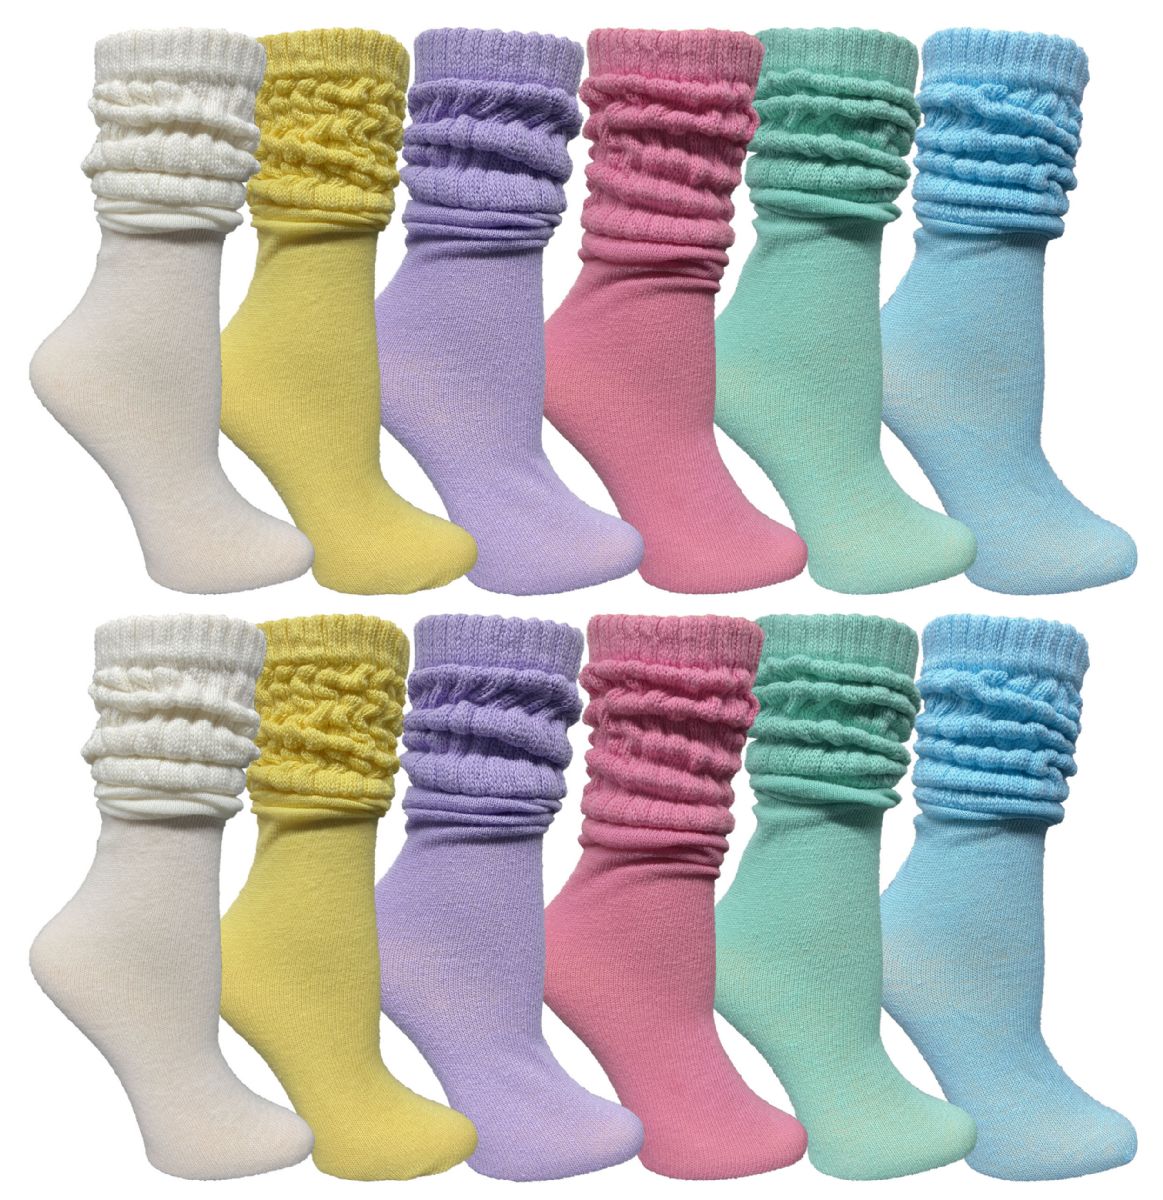 24 Bulk Yacht & Smith Women's Assorted Colored Slouch Socks Size 9-11